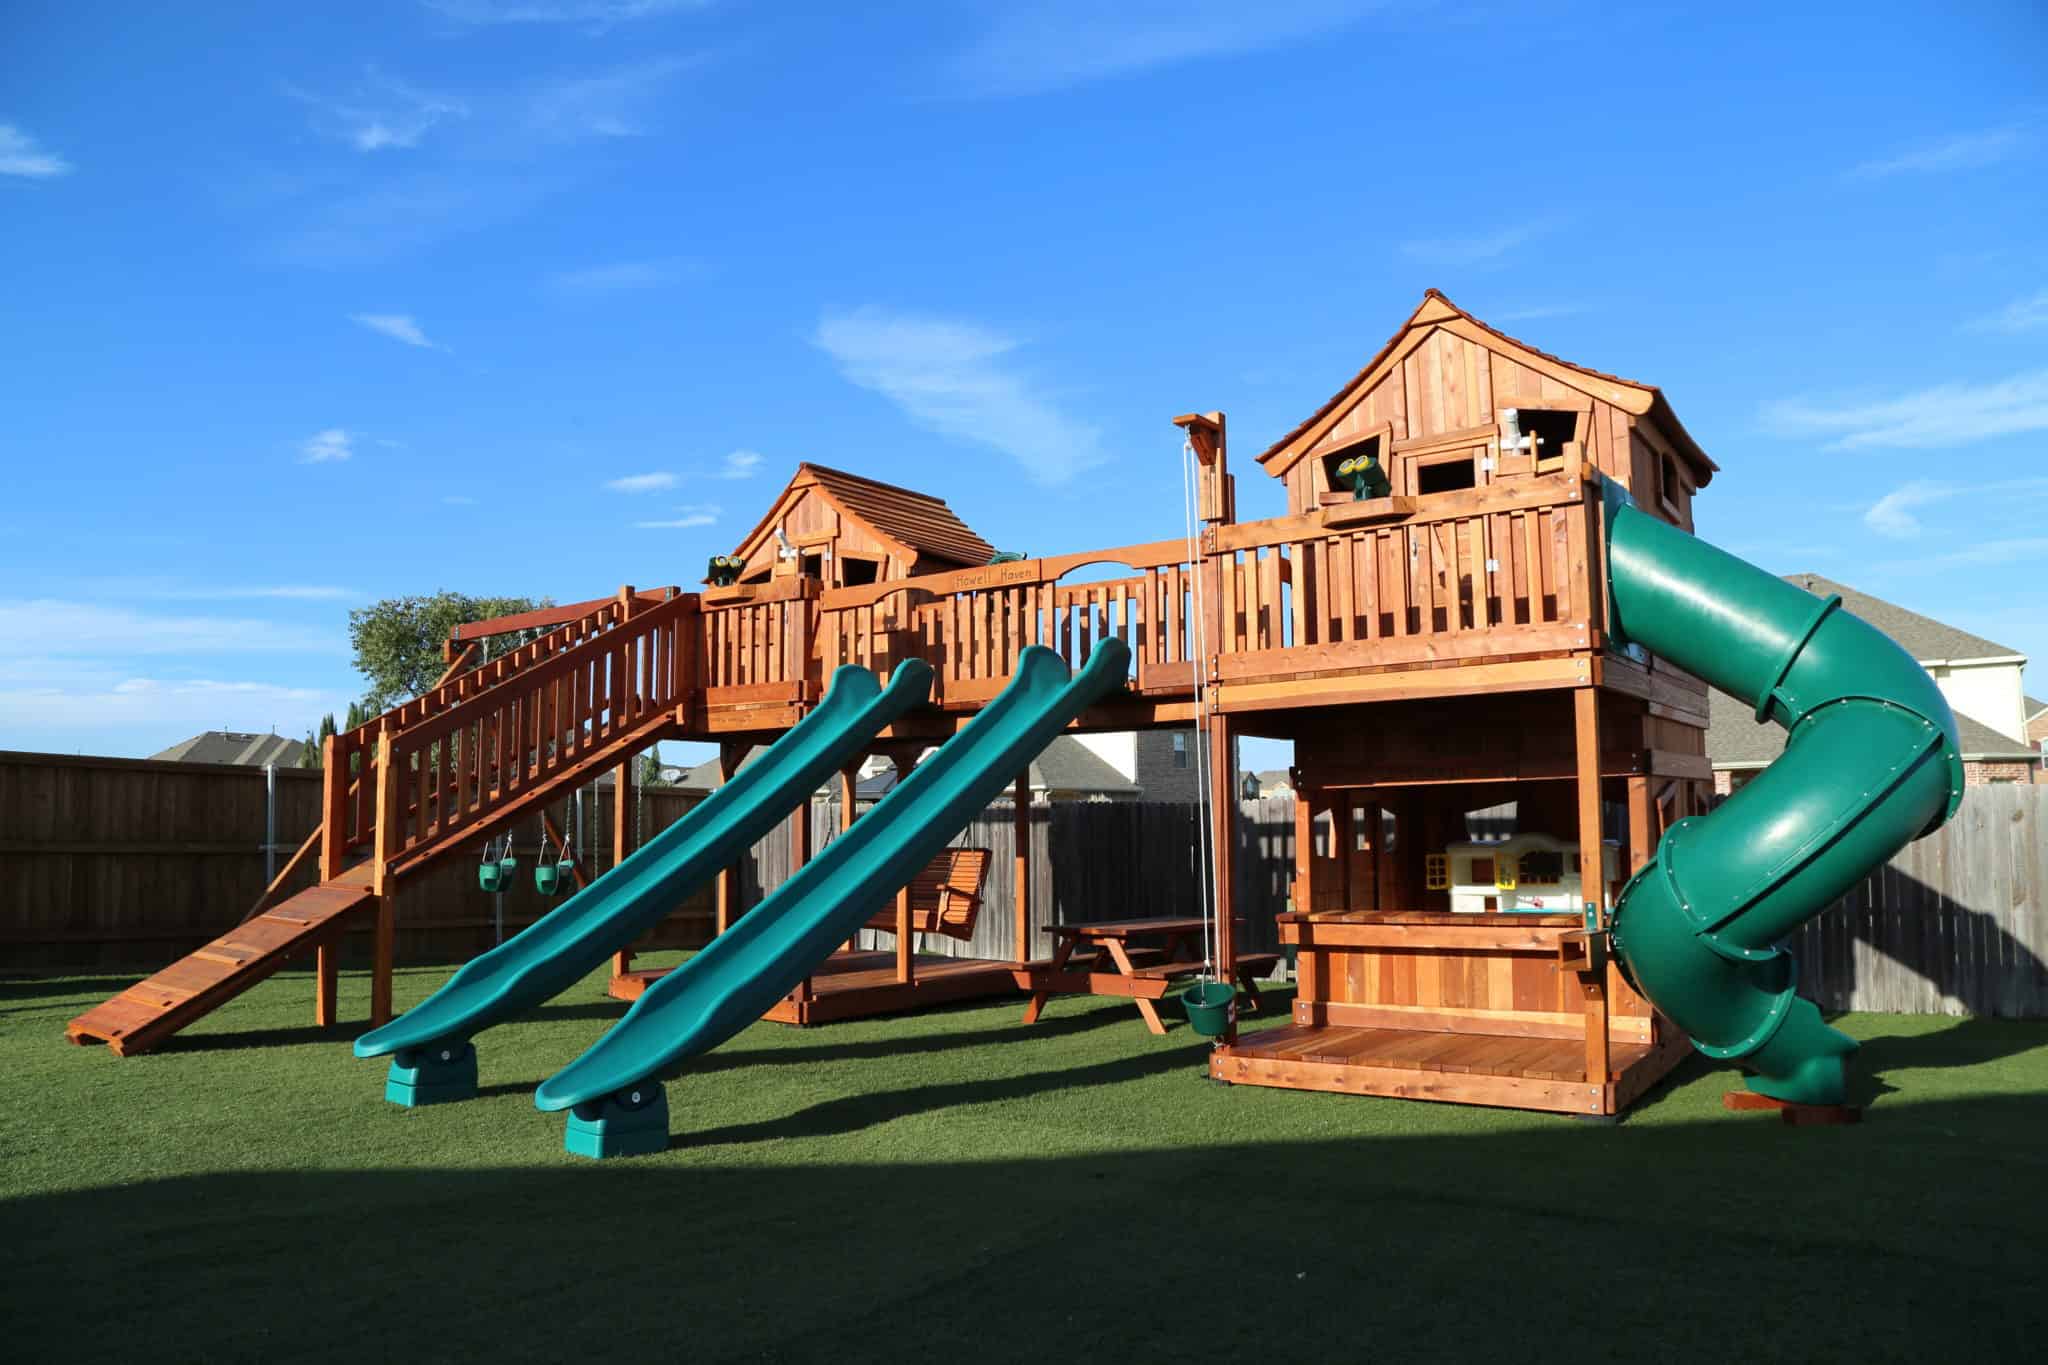 Saginaw, Texas, Bridged redwood playset with swings and adult porch swing. Spiral slide and rocket slides accessorize this fun backyard swing set.